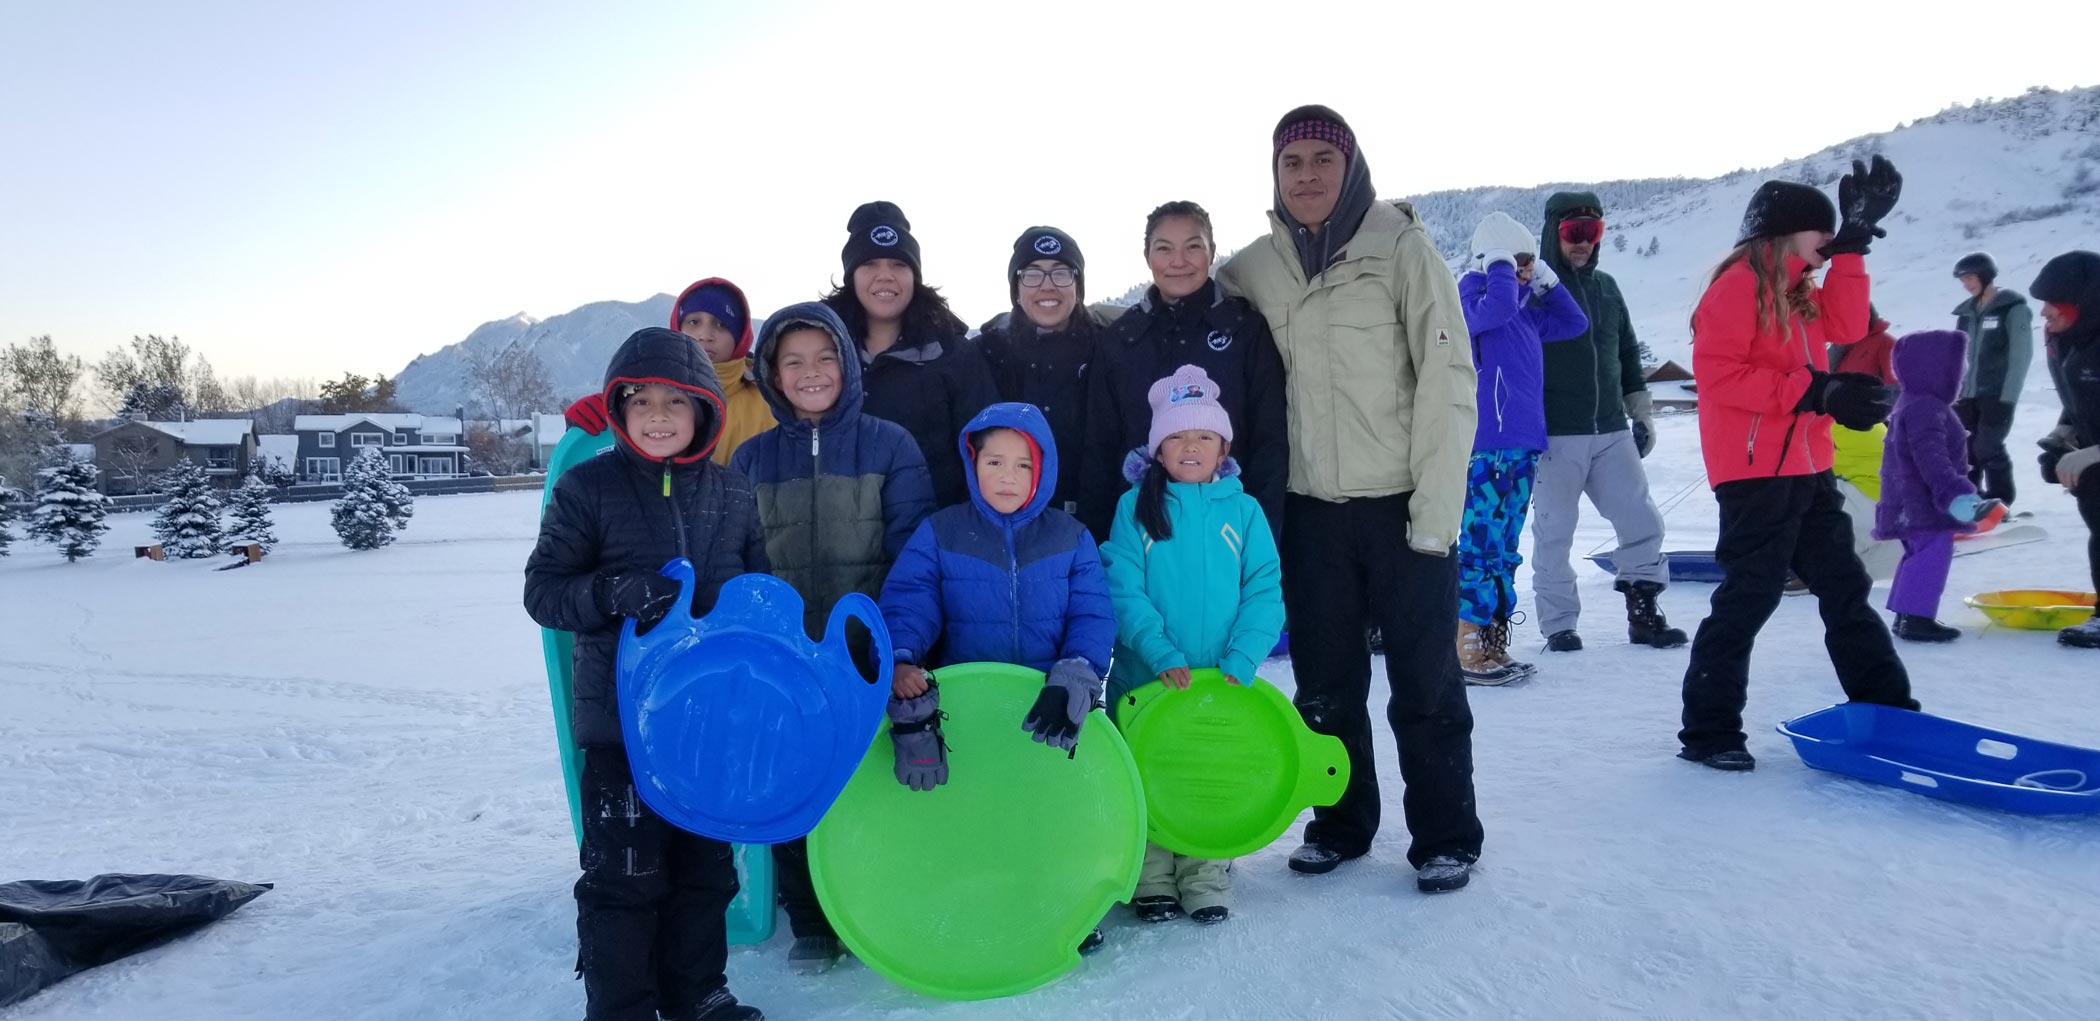 A group of Youth and Adults sleds on a snowy winter day.